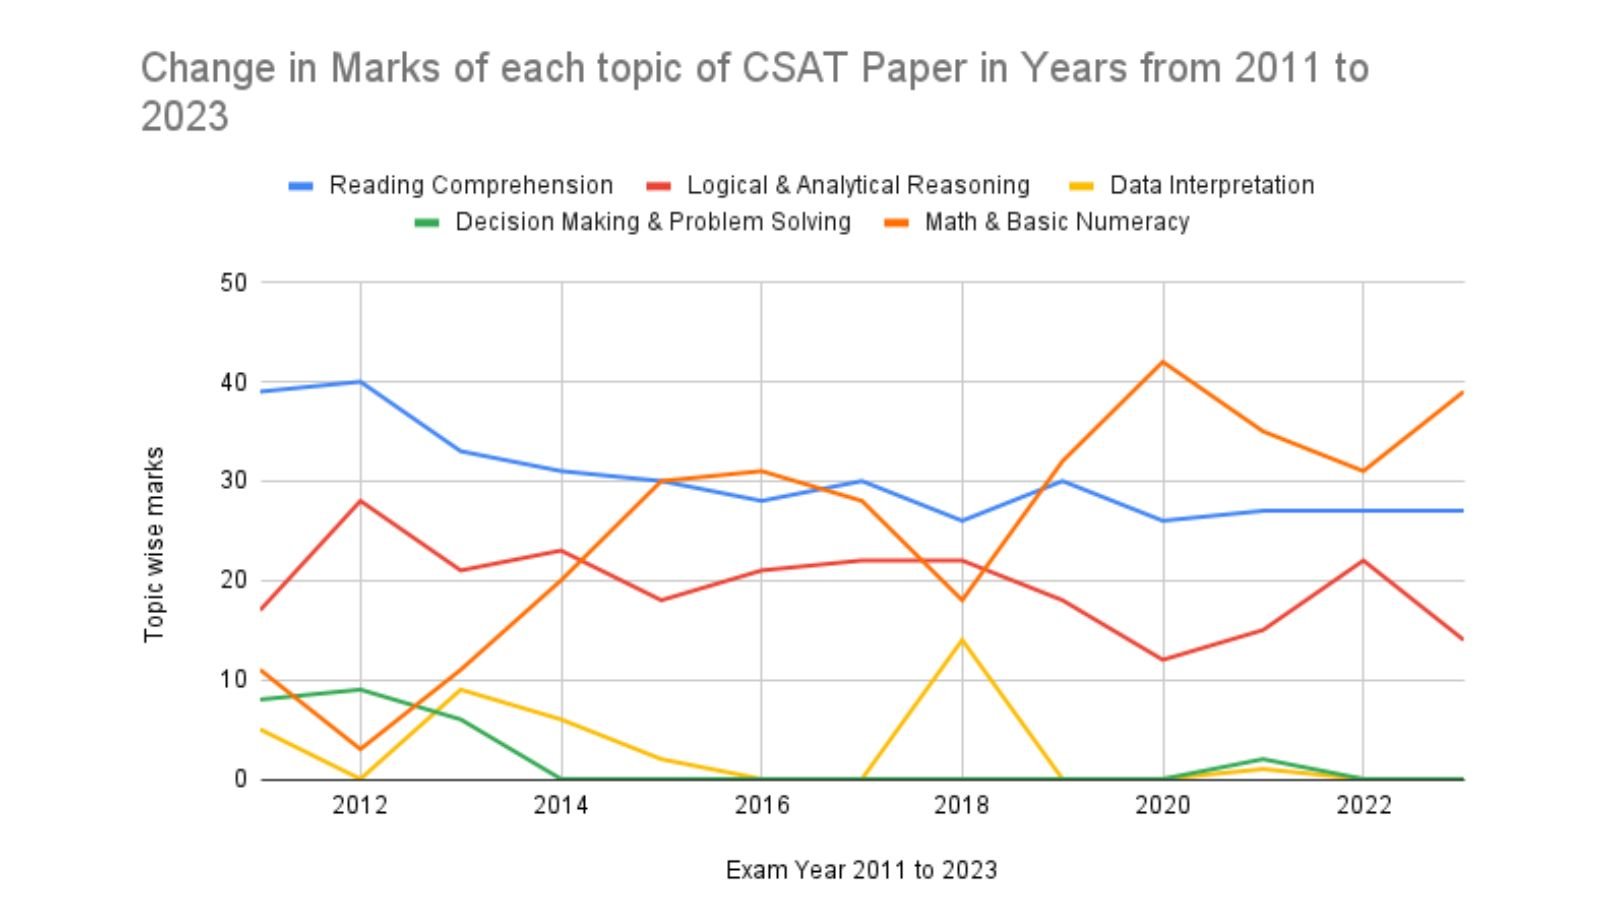 Change in Marks of each topic of CSAT Paper in Years from 2011 to 2023